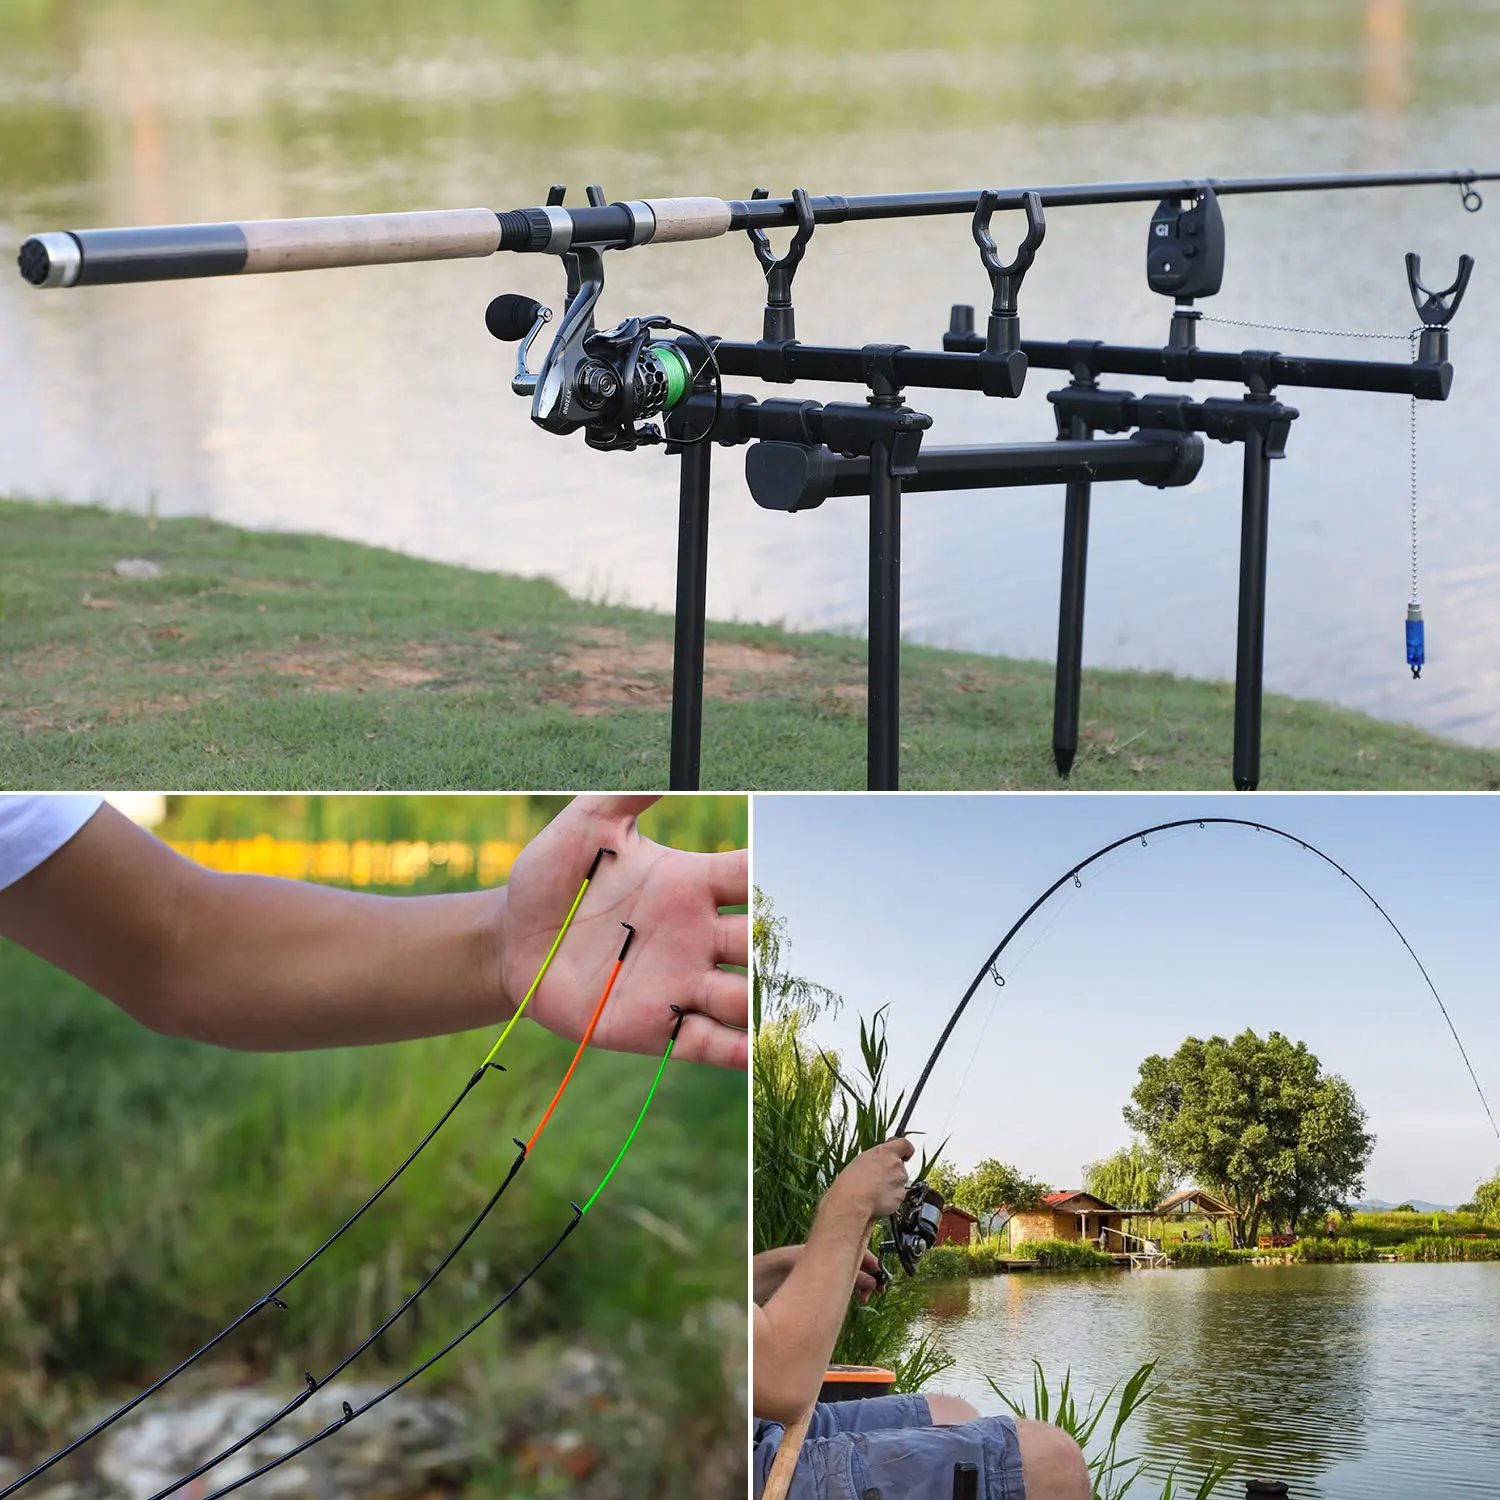 

Telescopic Spinning/6 Sections Travel Feeder Rod 3.0m 3.3m 3.6m Pesca Carp Feeder 60-180g Pole Fish Tackle